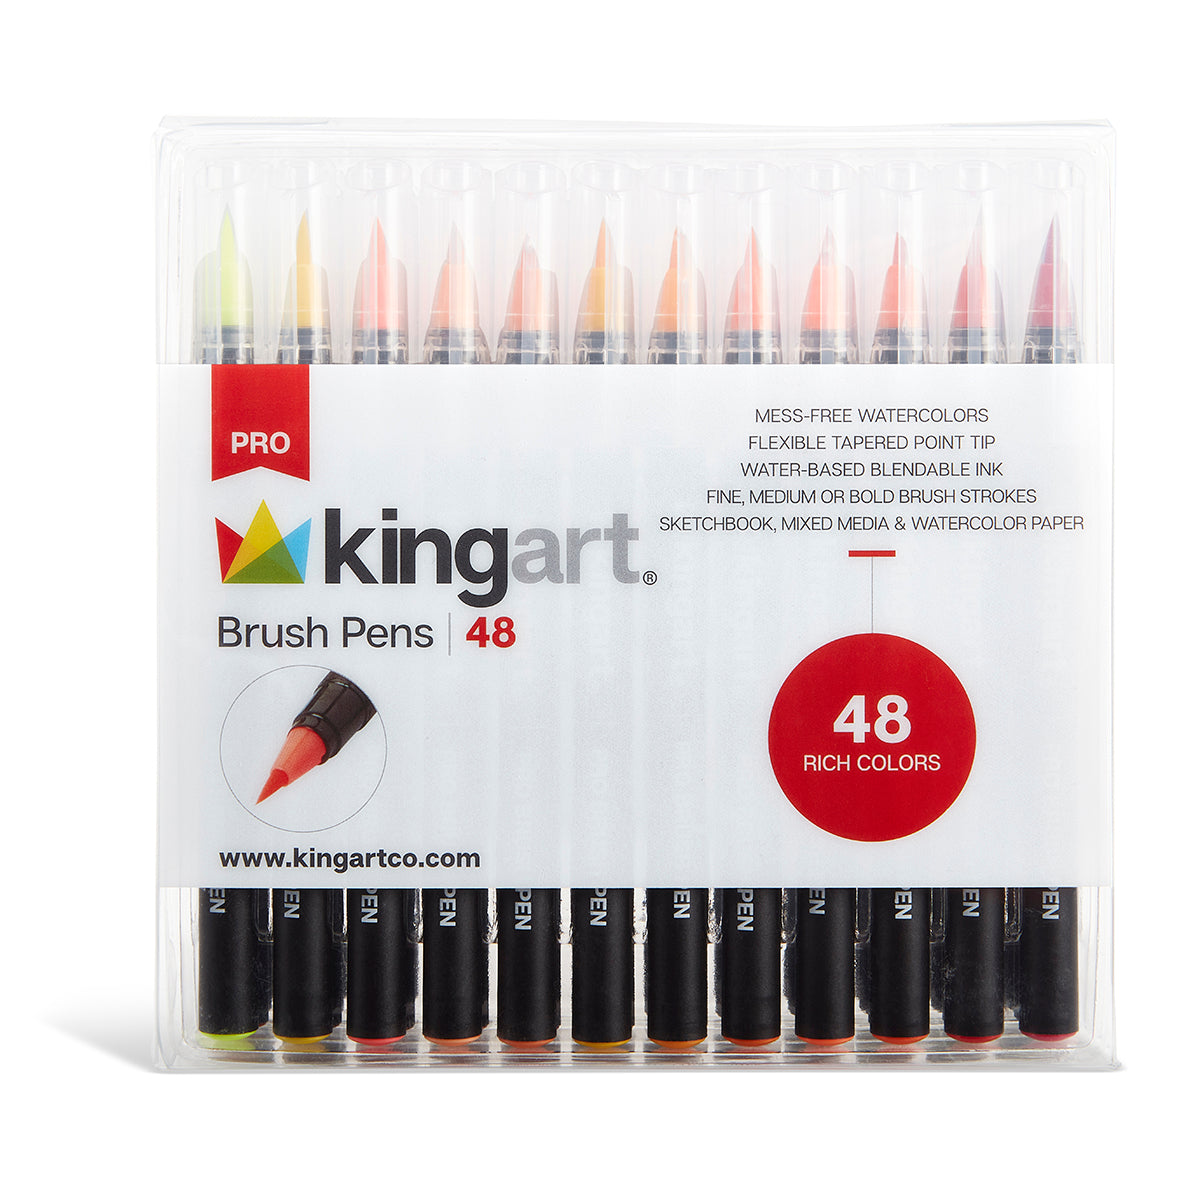 KINGART® PRO Real Brush Watercolor Pens, Set of 48 Unique Colors for  Creating Illustrations, Calligraphy, and Watercolor Effects